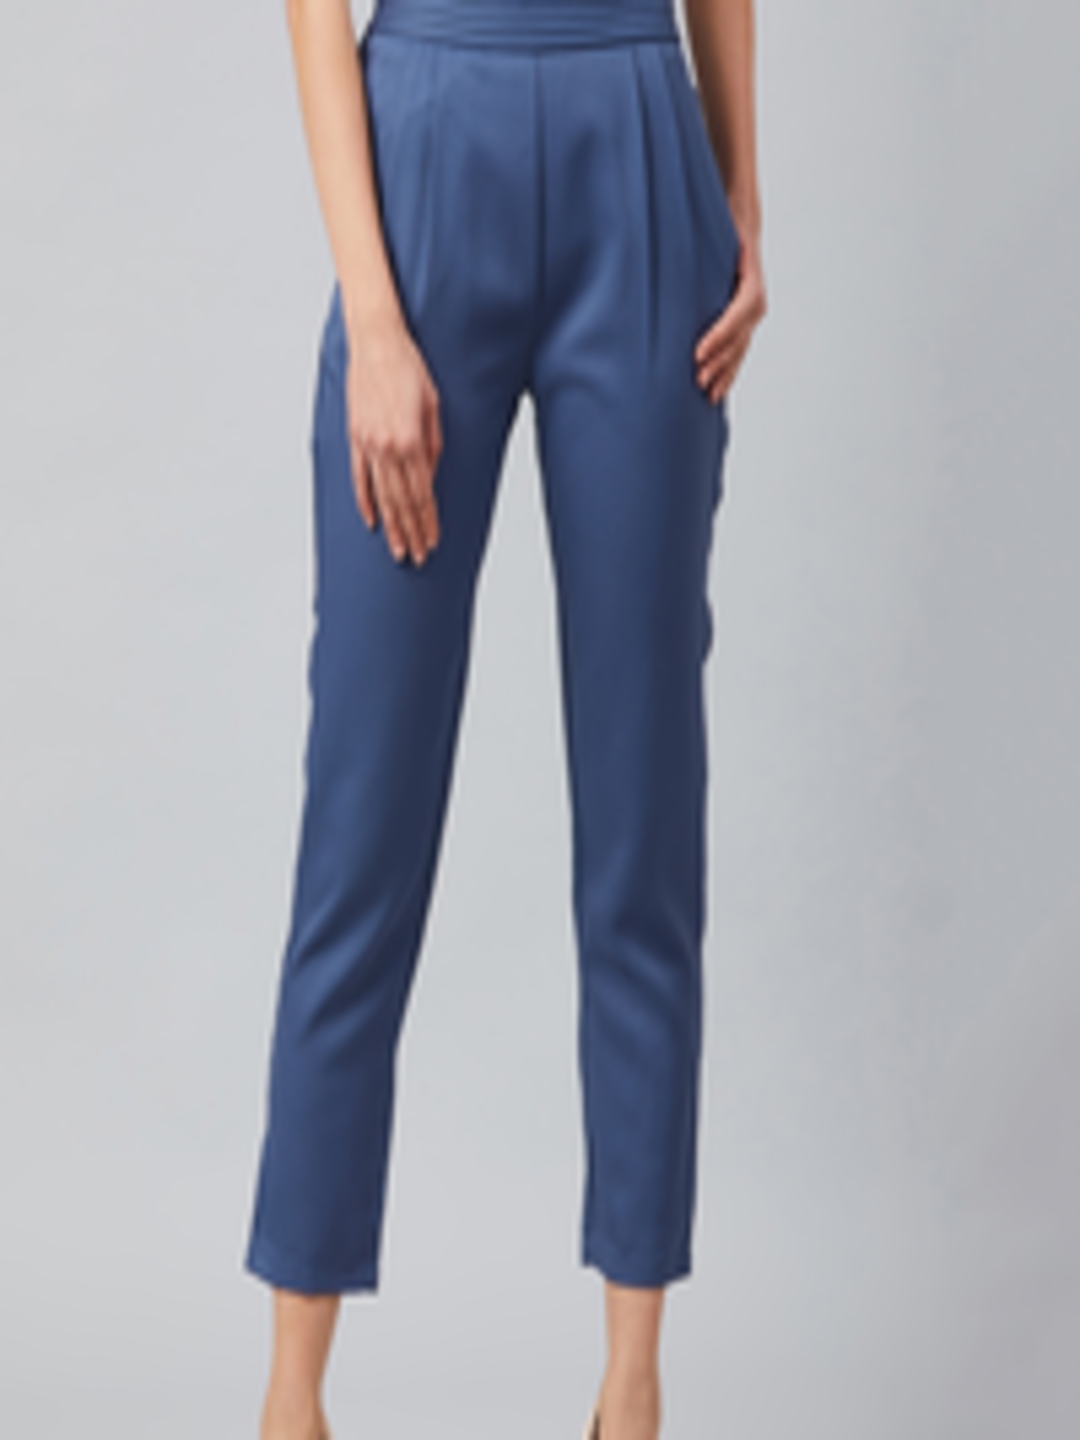 Buy Marie Claire Women Blue Regular Fit Solid Regular Trousers ...